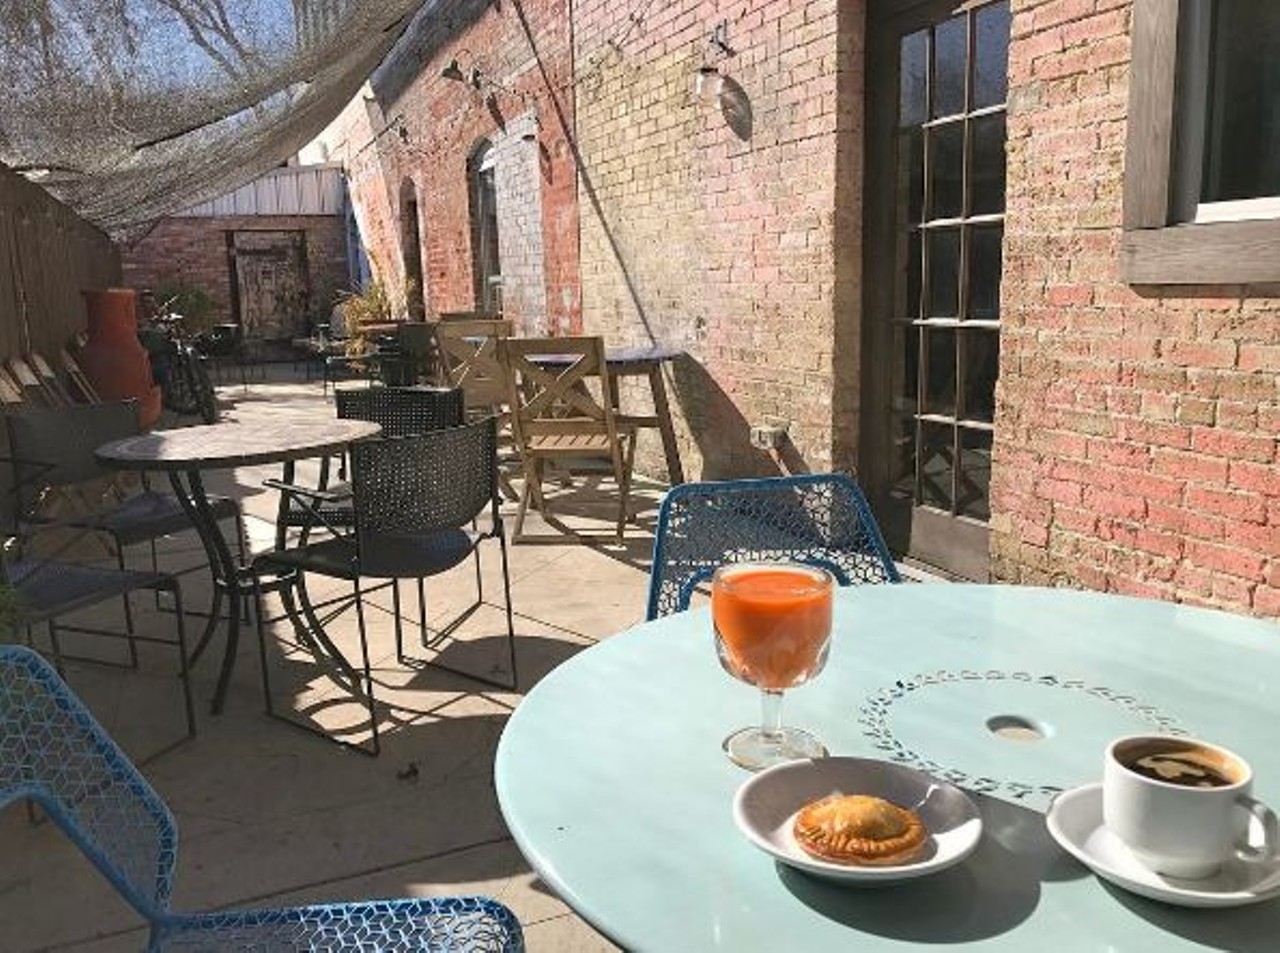 Five Points
1017 N Flores St, (210) 267-2652, 5pointslocal.com
After a yoga sesh upstairs, grab a smoothie or juice and take in some brunch on this urban patio.
Photo via Instagram, namouze